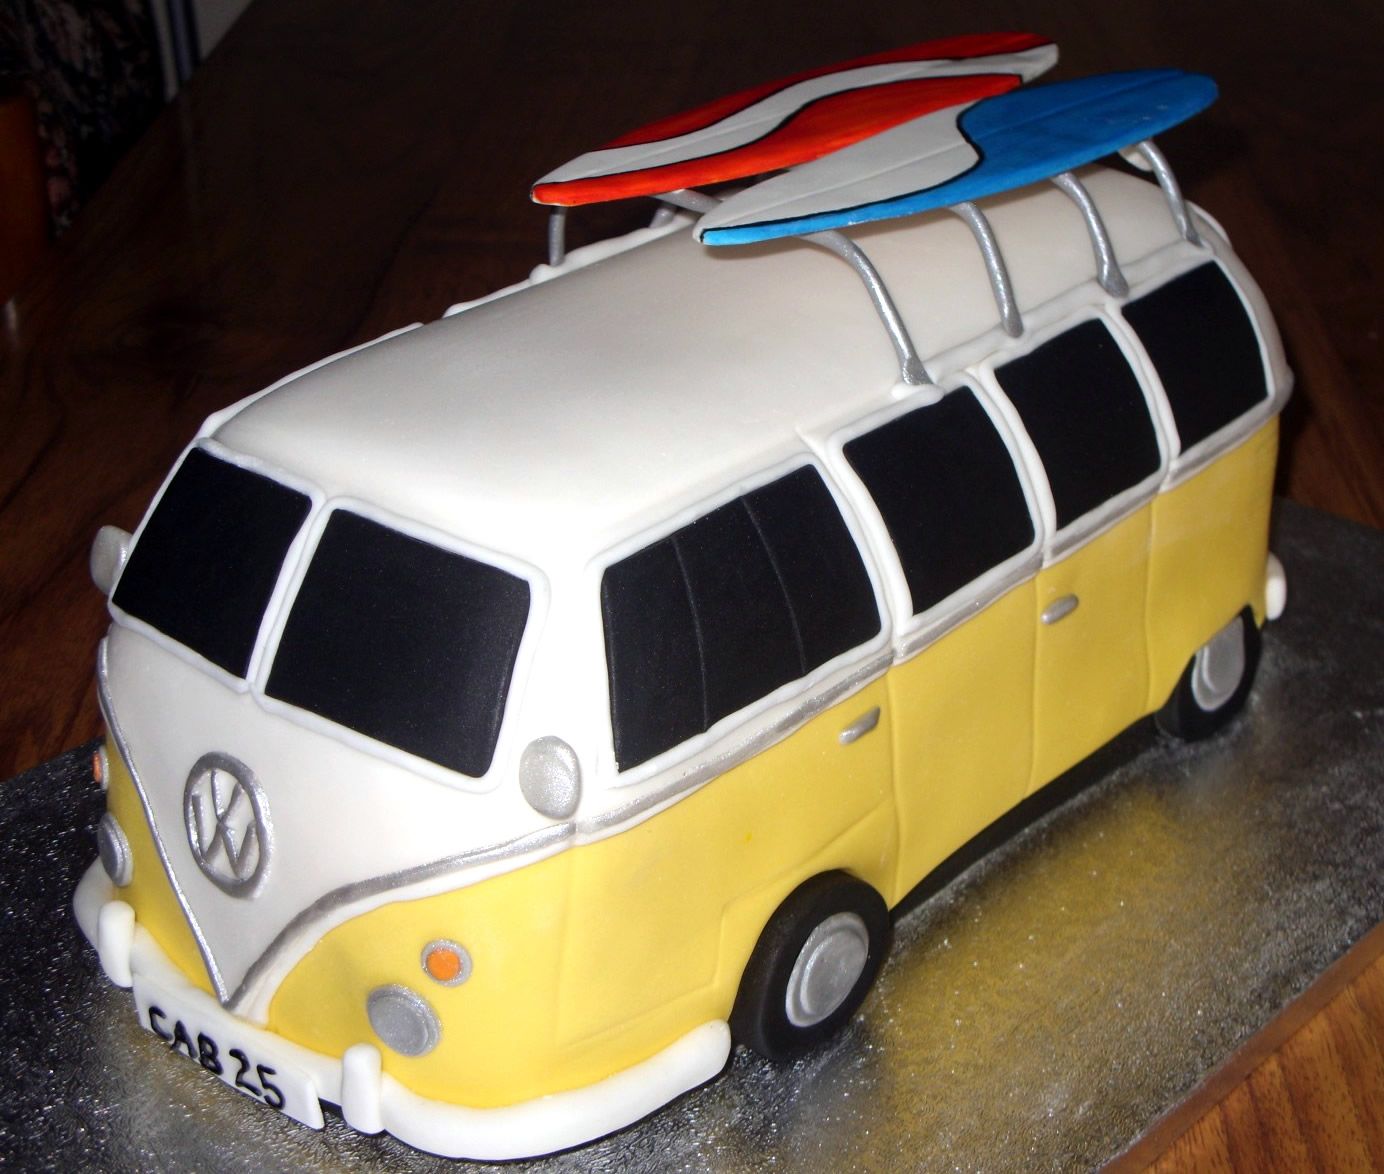 surf cakes